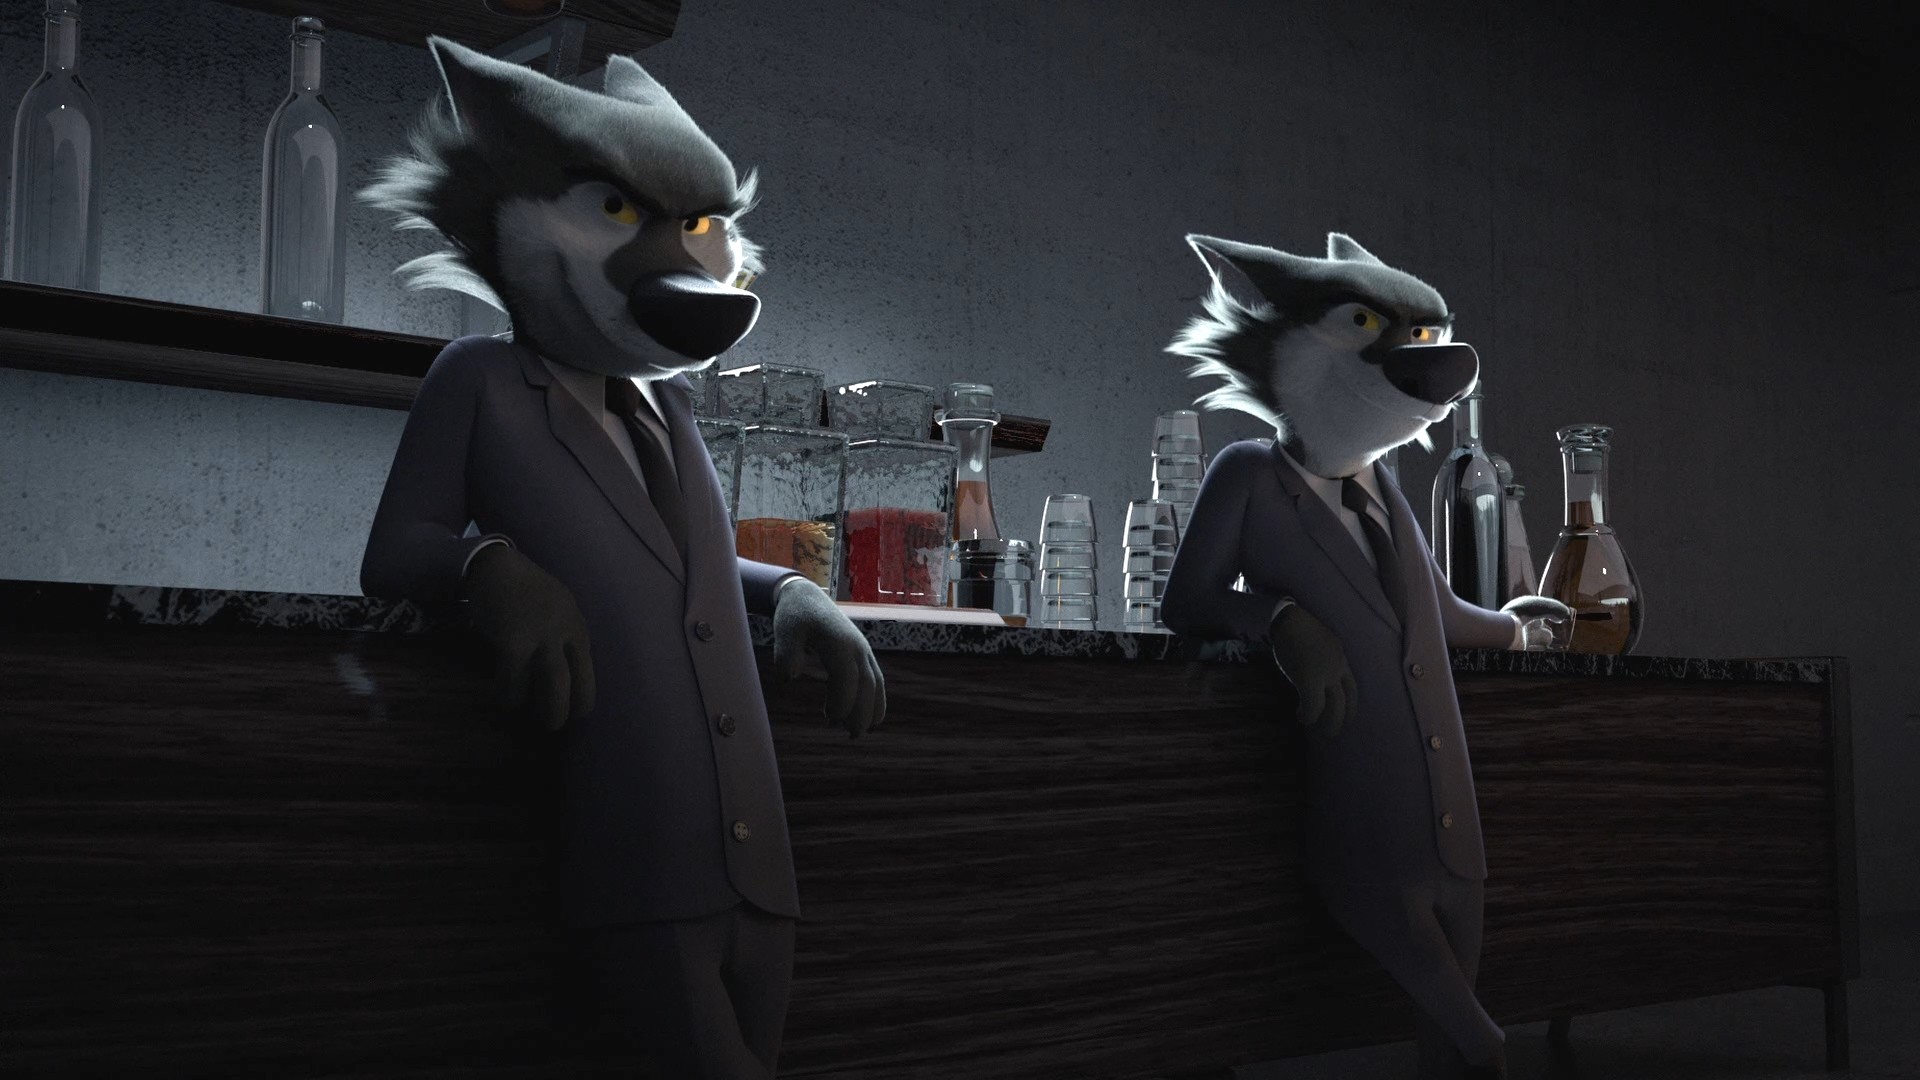 Wolf Anthro Animals 3D Cartoon Movies Suits Clothing Tie Gangsters Gangster Screen Shot Screengrab R 1920x1080